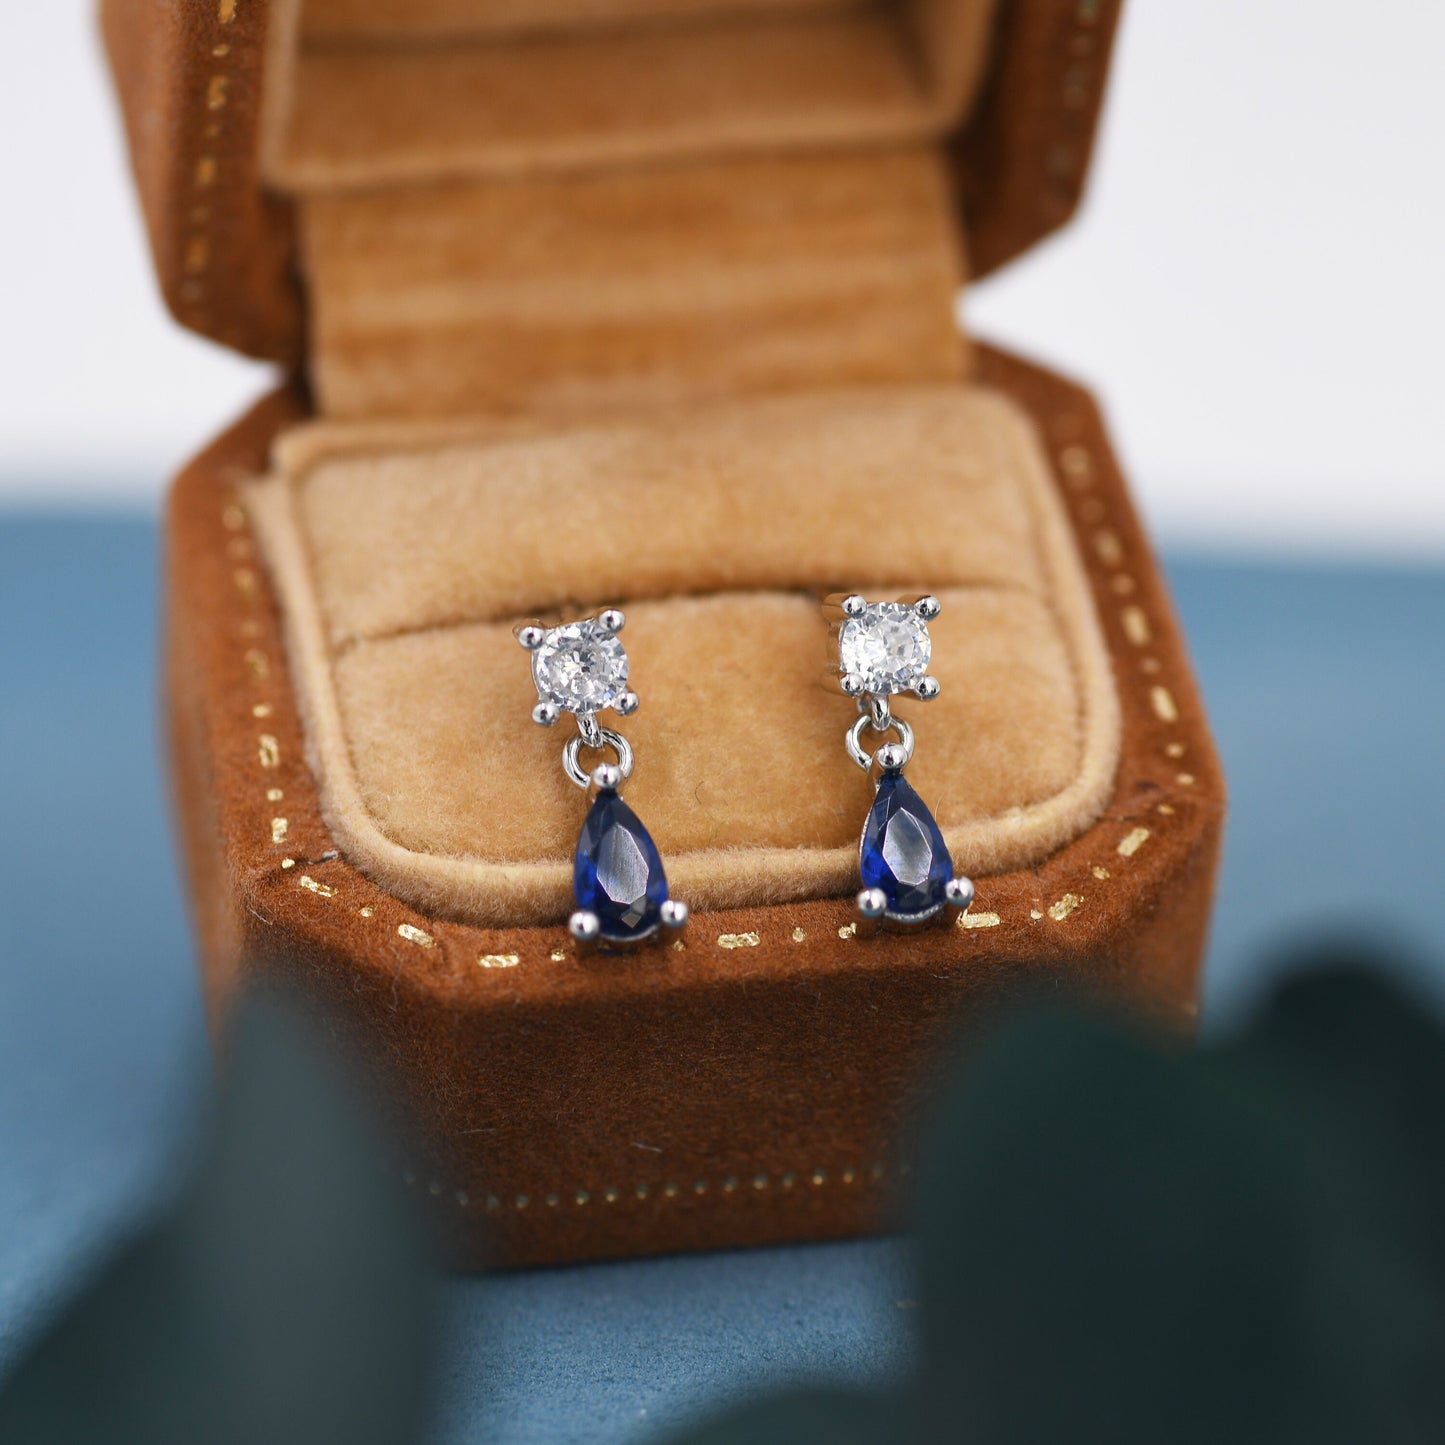 Tiny Sapphire Blue CZ Dangle Stud Earrings in Sterling Silver with Round and Droplet CZ, Silver or Gold, Two CZ Prong Set Earrings